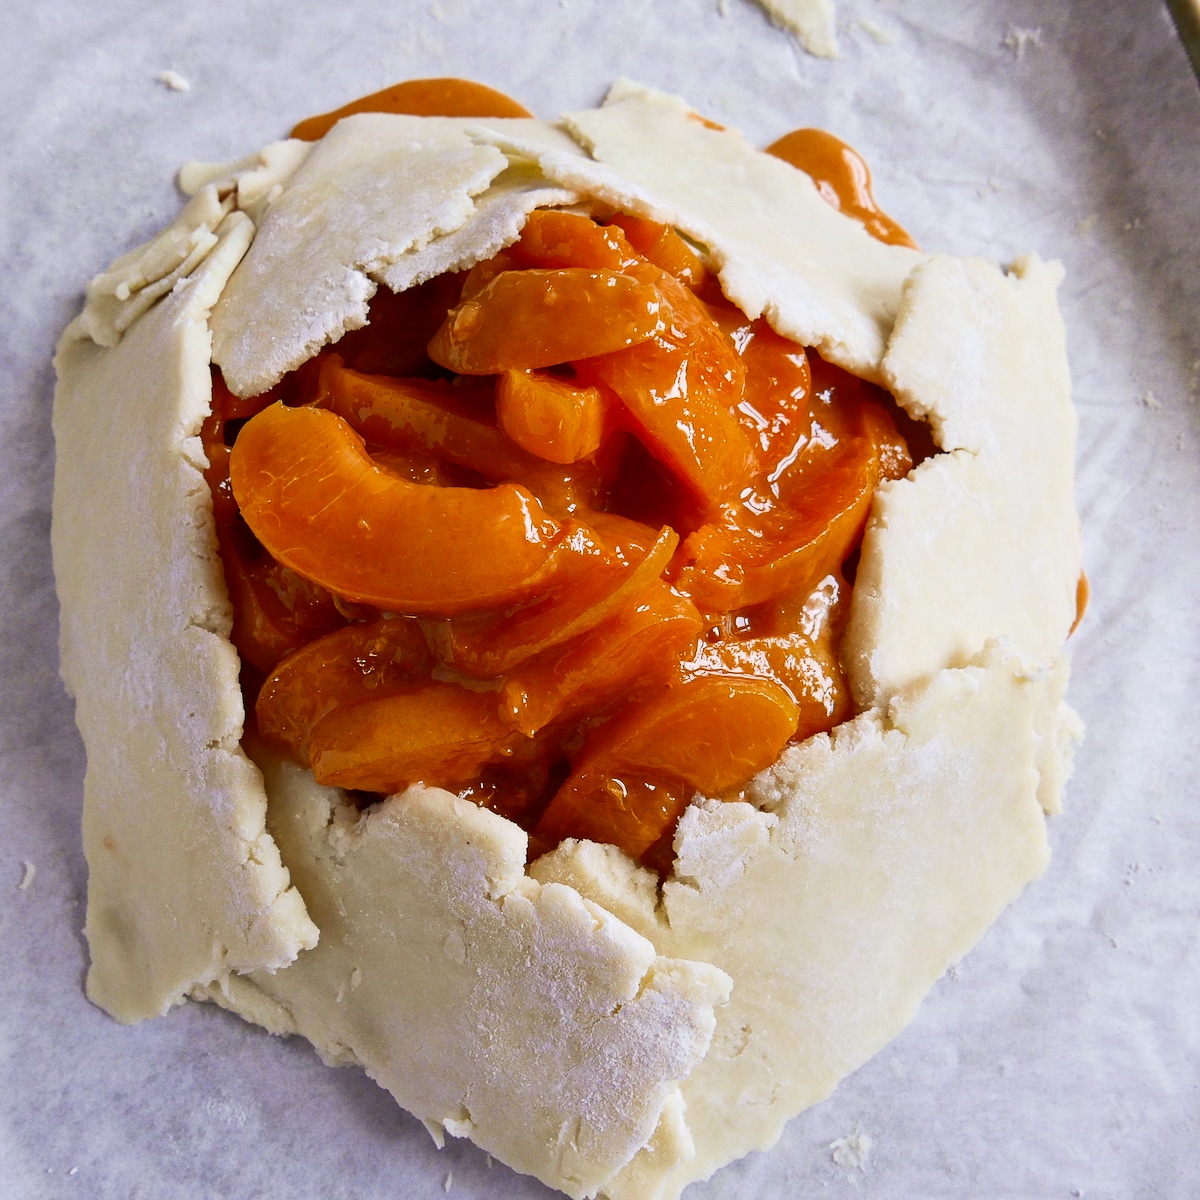 Dough folded up around the apricot filling.